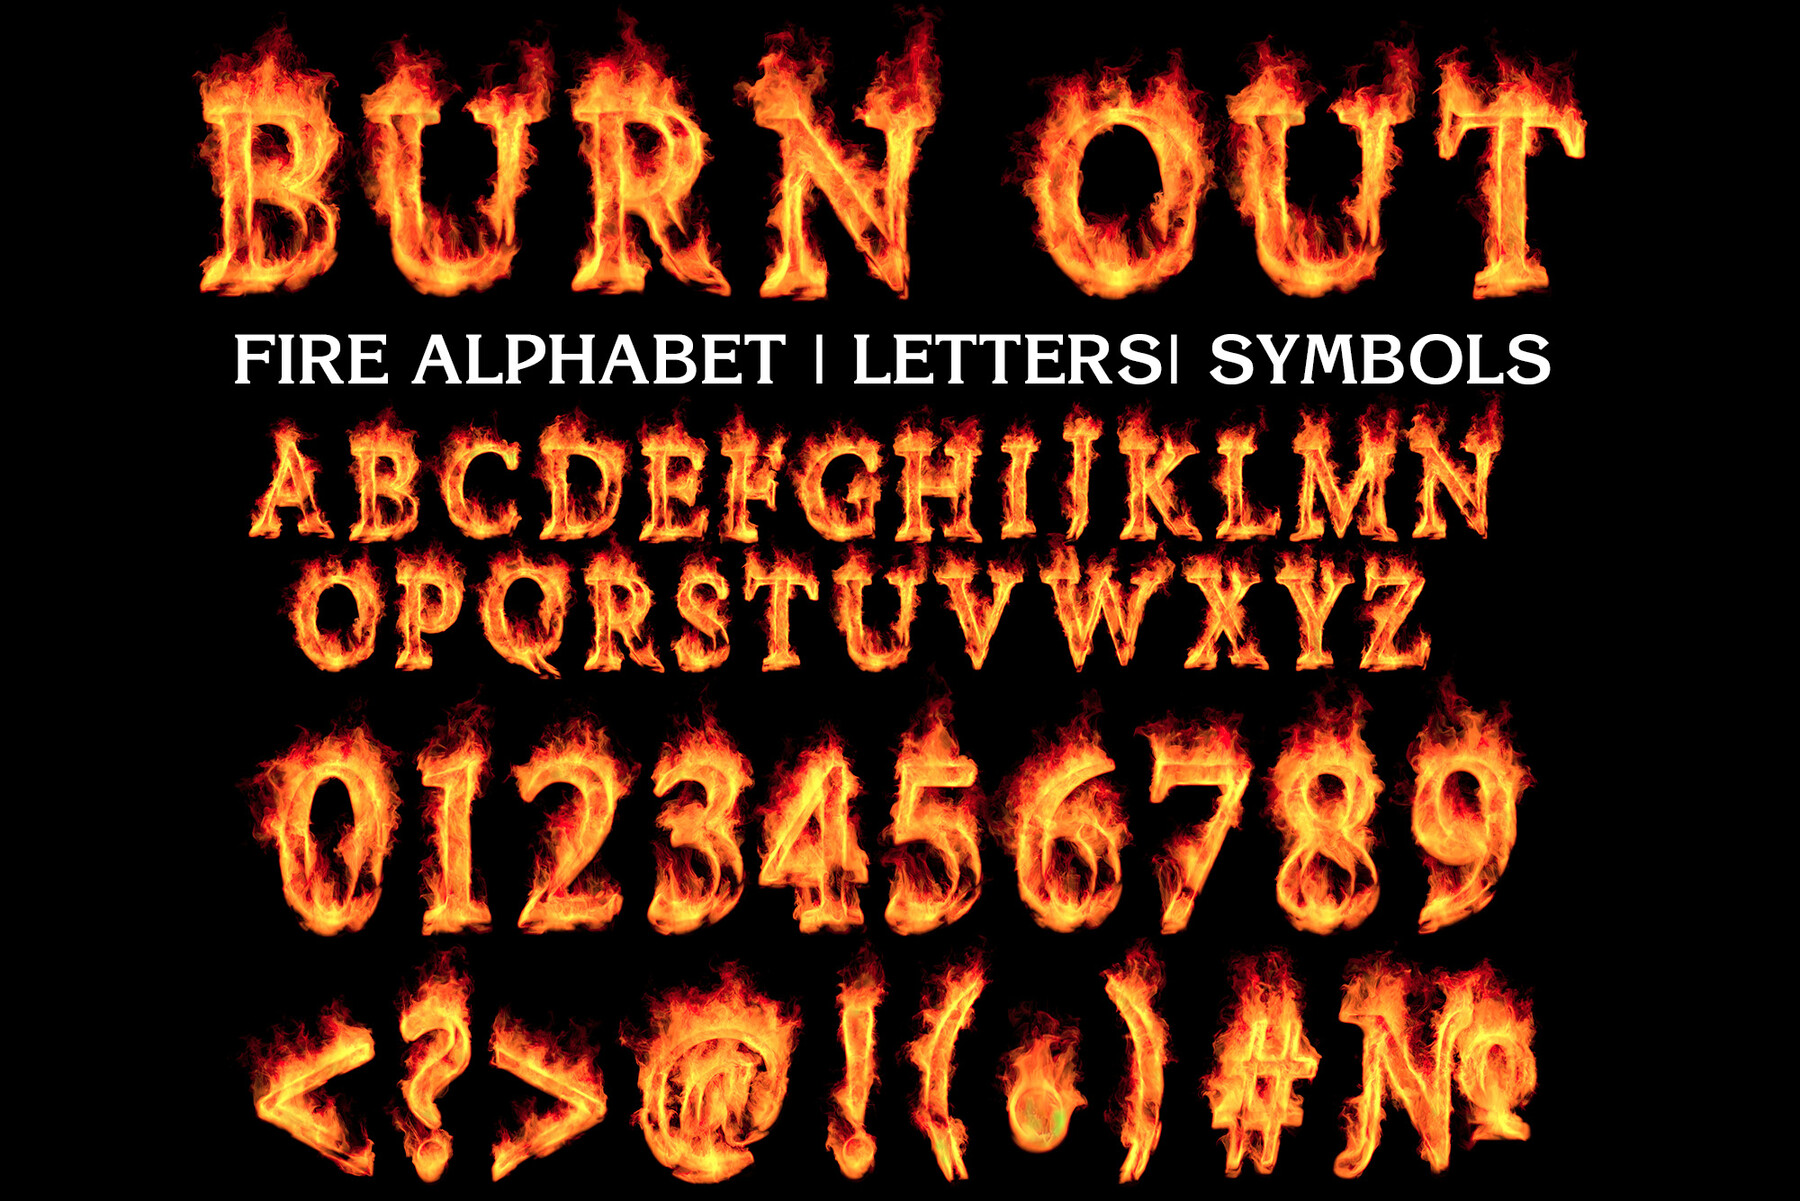 Mr Arthur Fire Alphabet Letters And Numbers Flaming Alphabet Set Of Letters In Flames